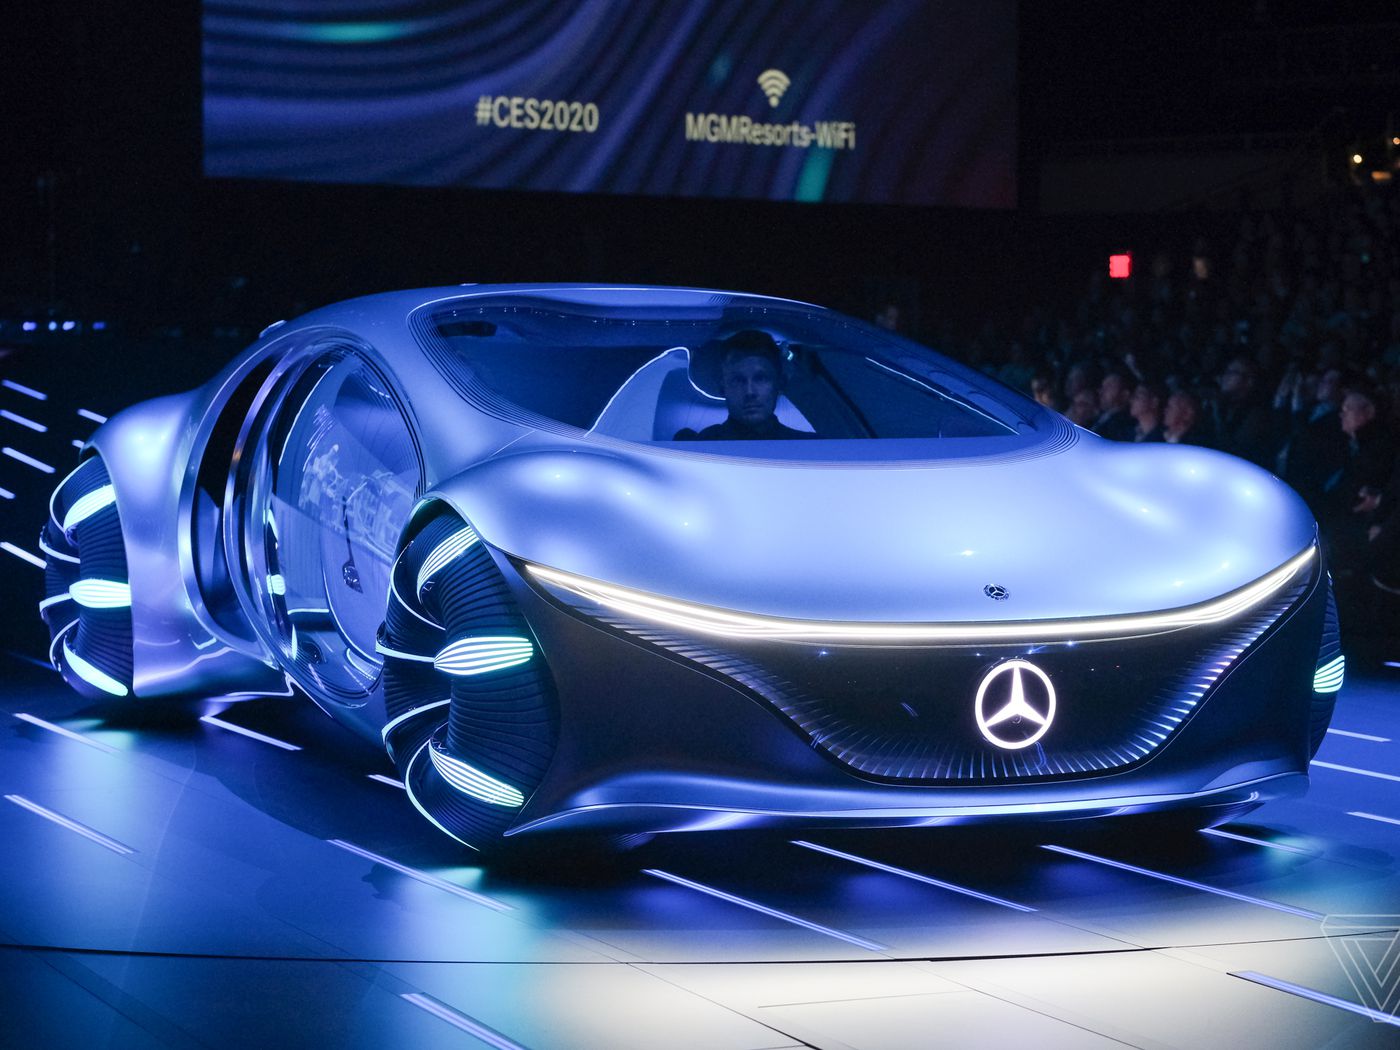 Mercedes-Benz unveils an Avatar-themed concept car with scales - The Verge